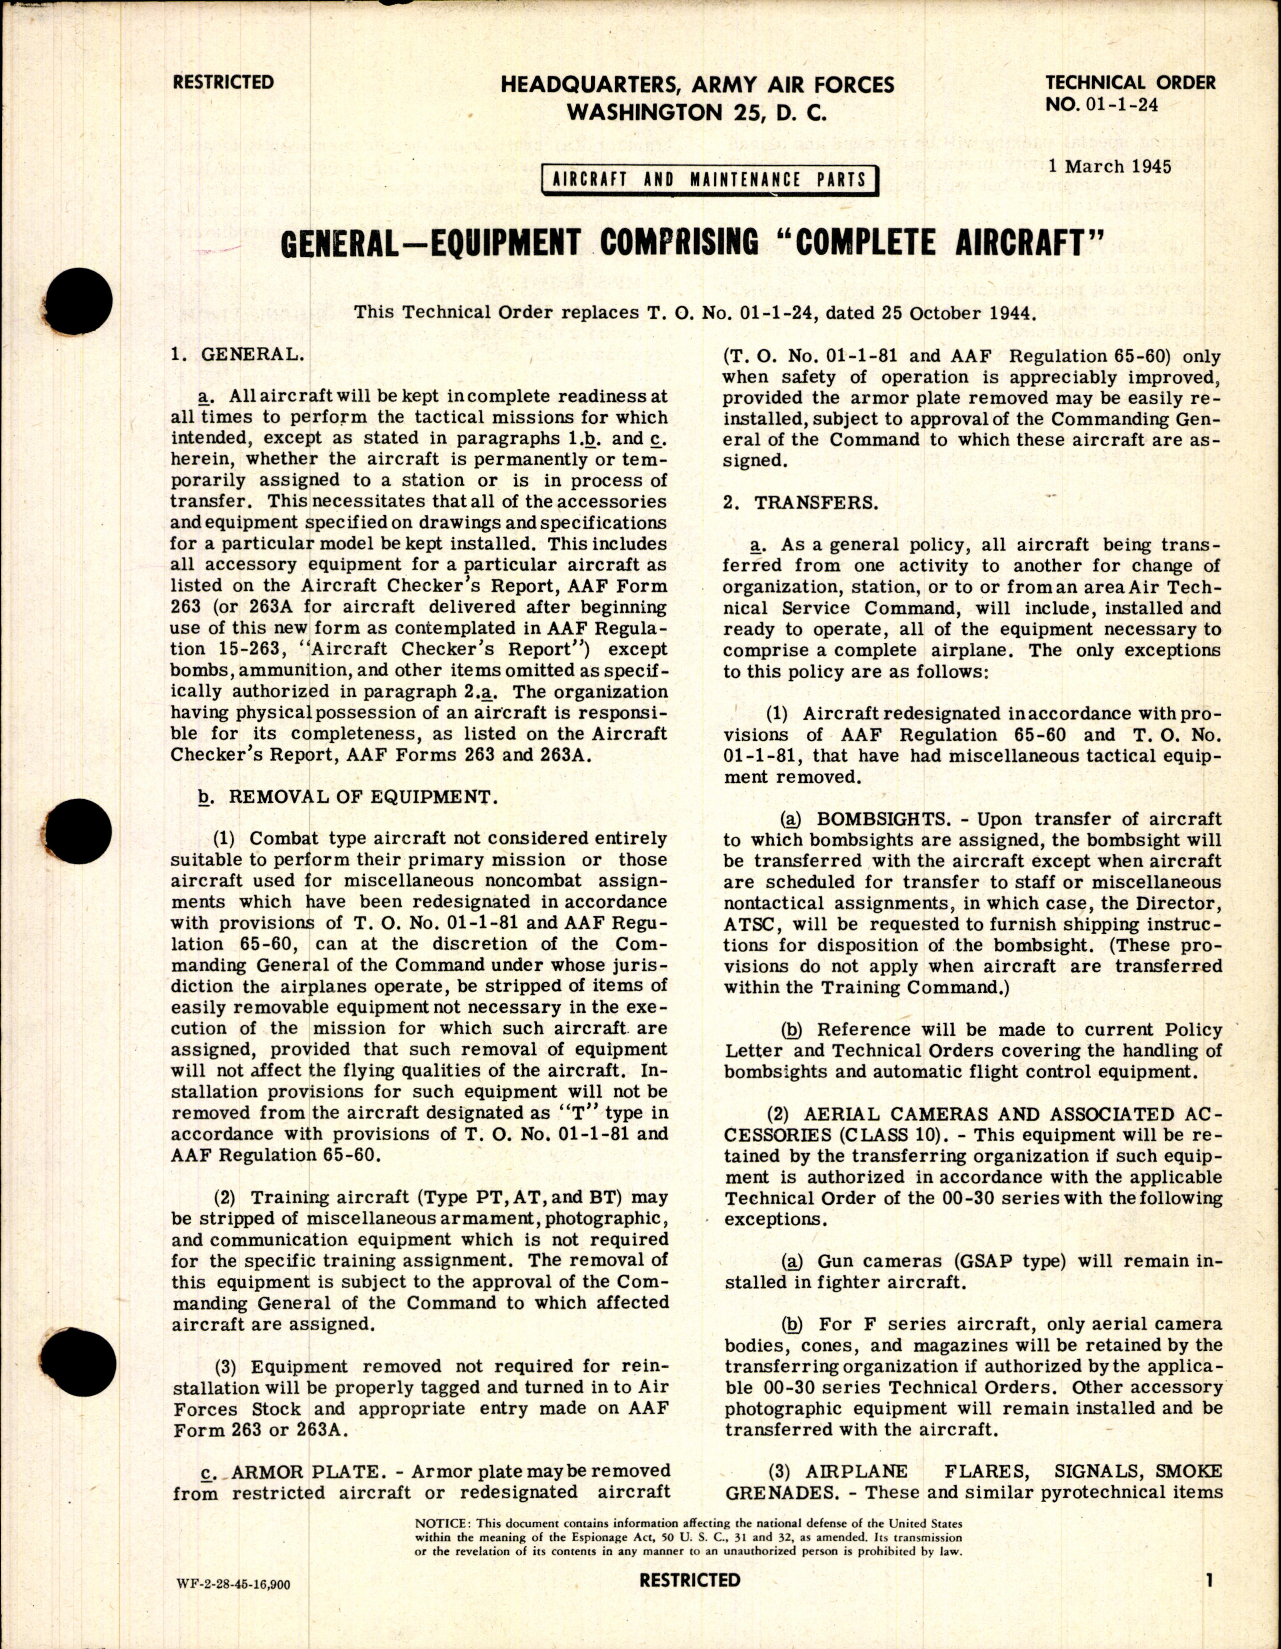 Sample page 1 from AirCorps Library document: Aircraft and Maintenance Parts for General Equipment Comprising 